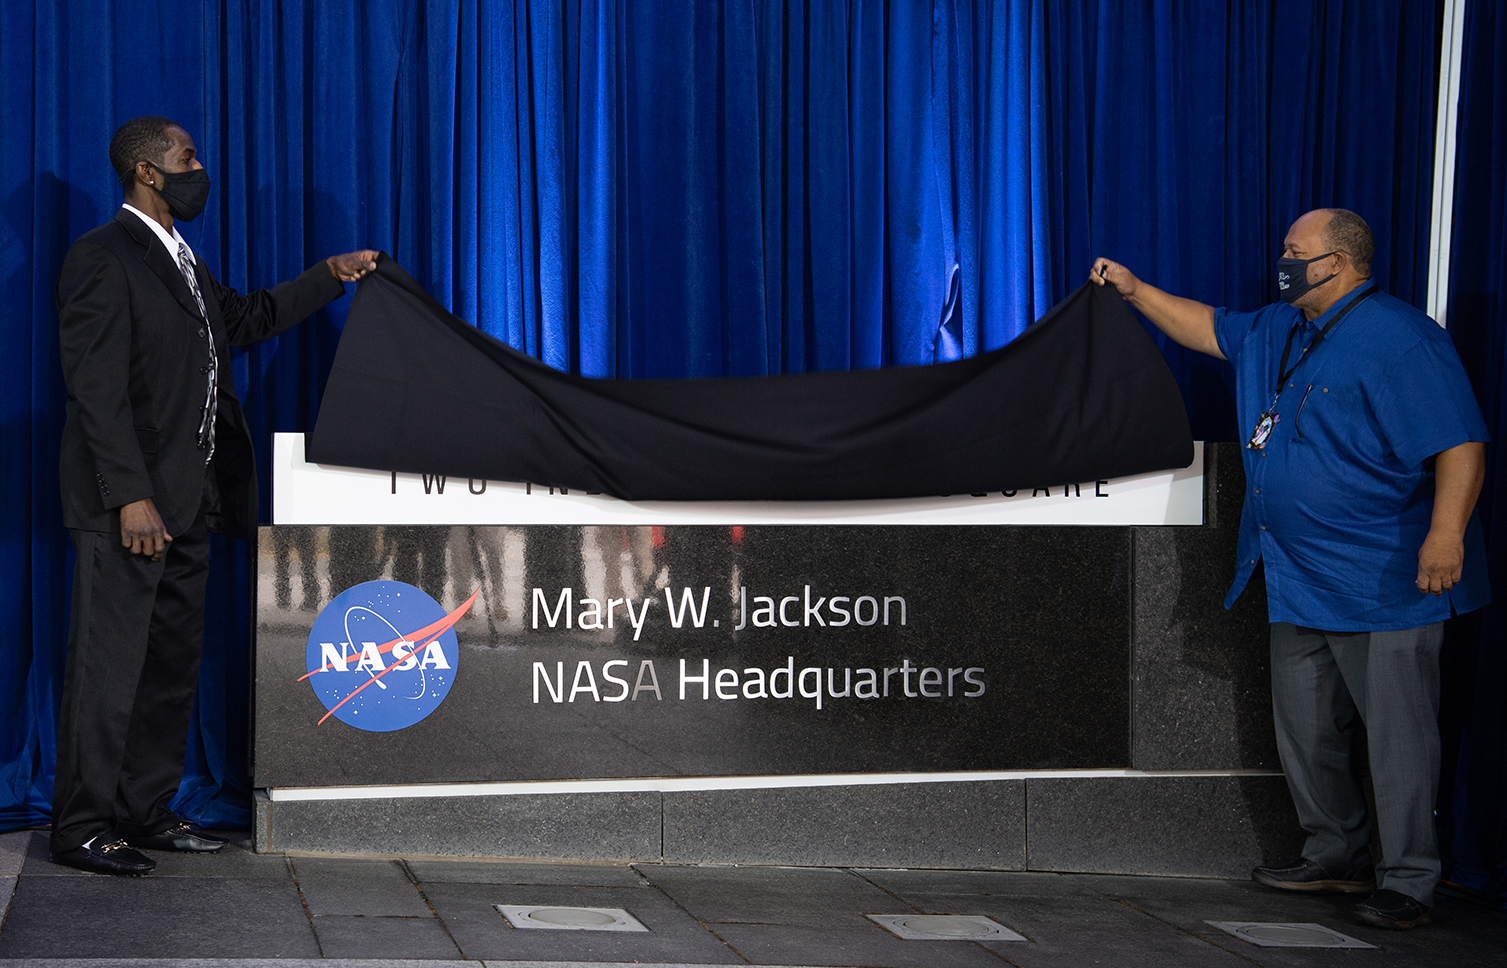 Mary Jackson's grandsons unveil the plague naming the NASA HQ building for her.